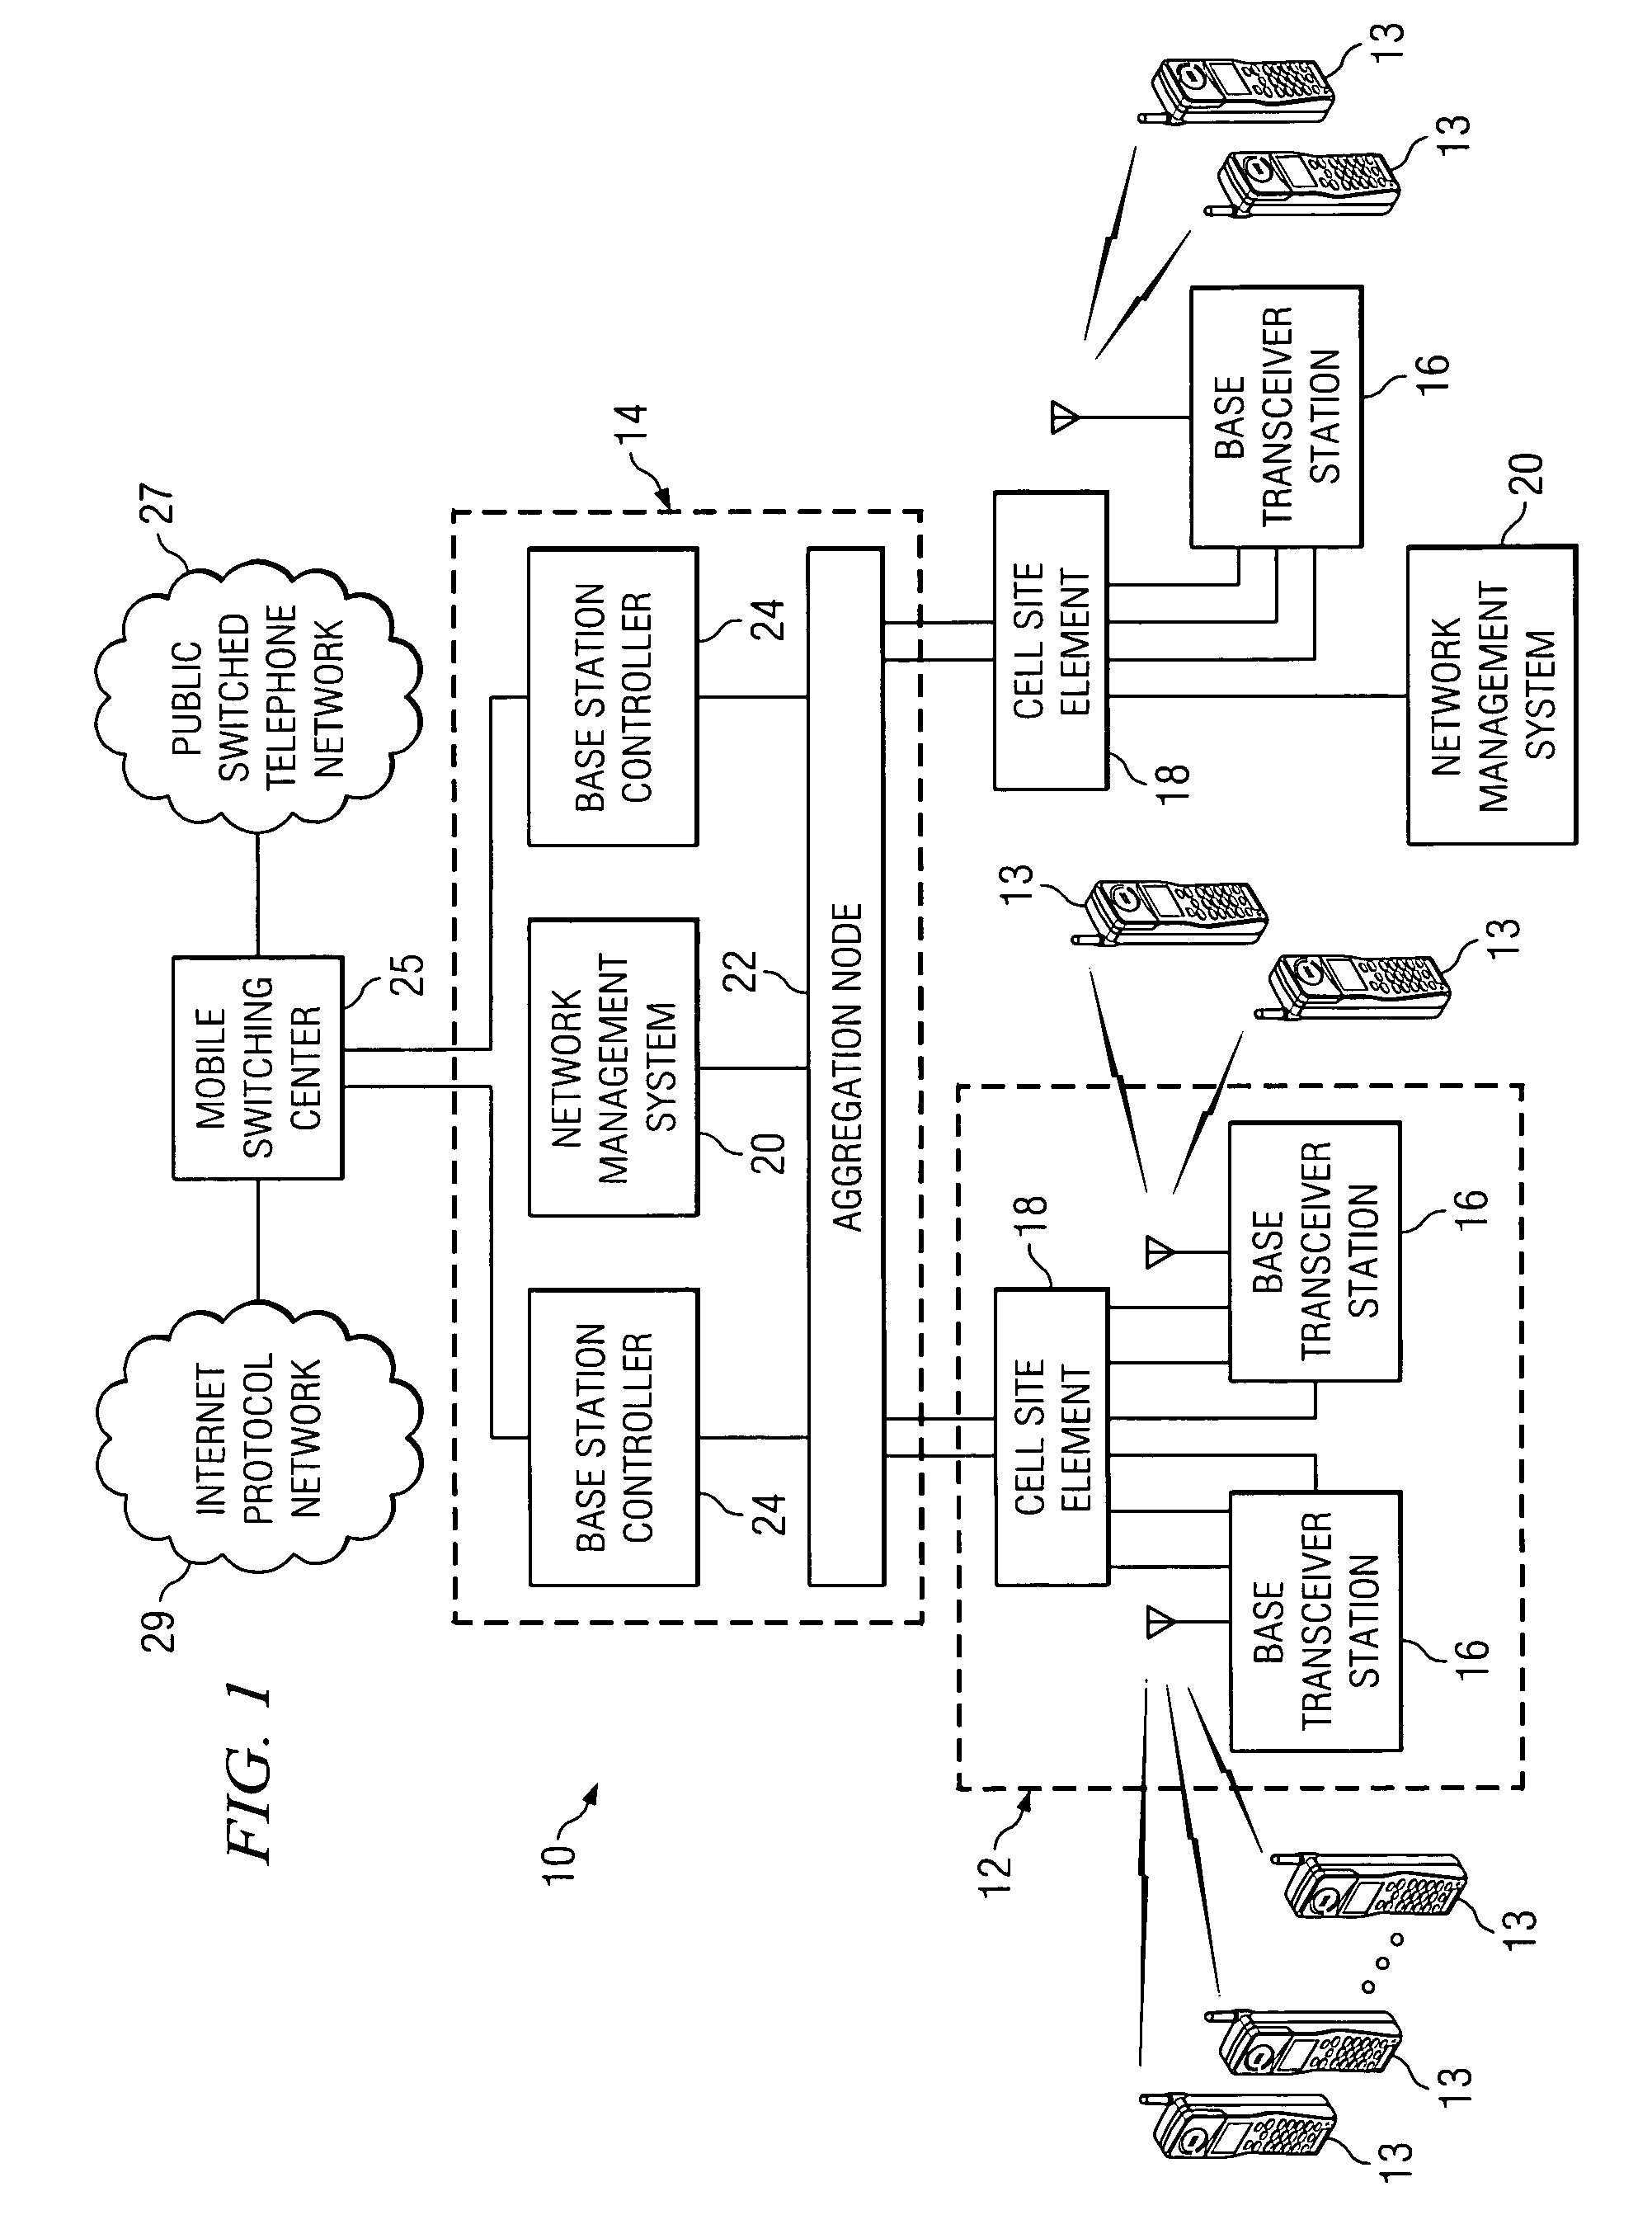 System and method for implementing a variable size codebook for compression in a communications environment